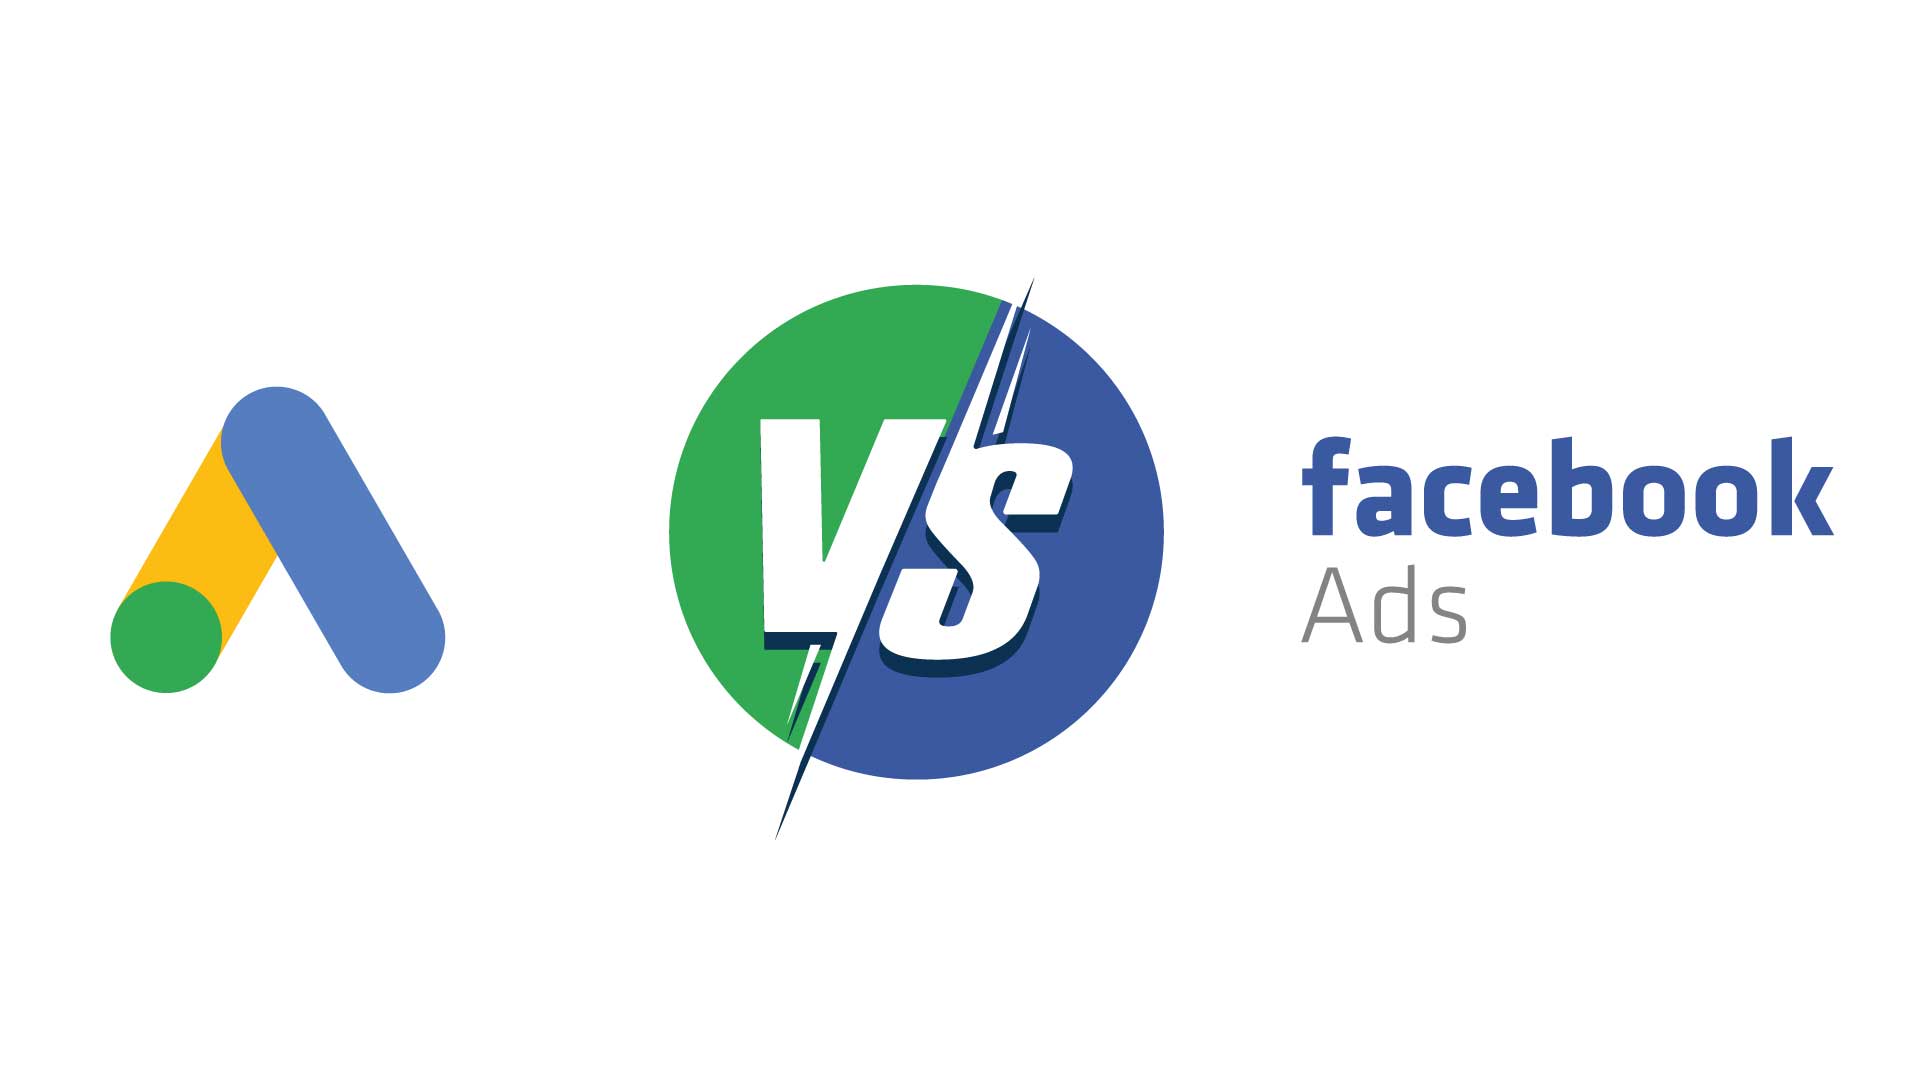 Facebook Ads AI and Google Ads AI. Machine Learning for Facebook Ads